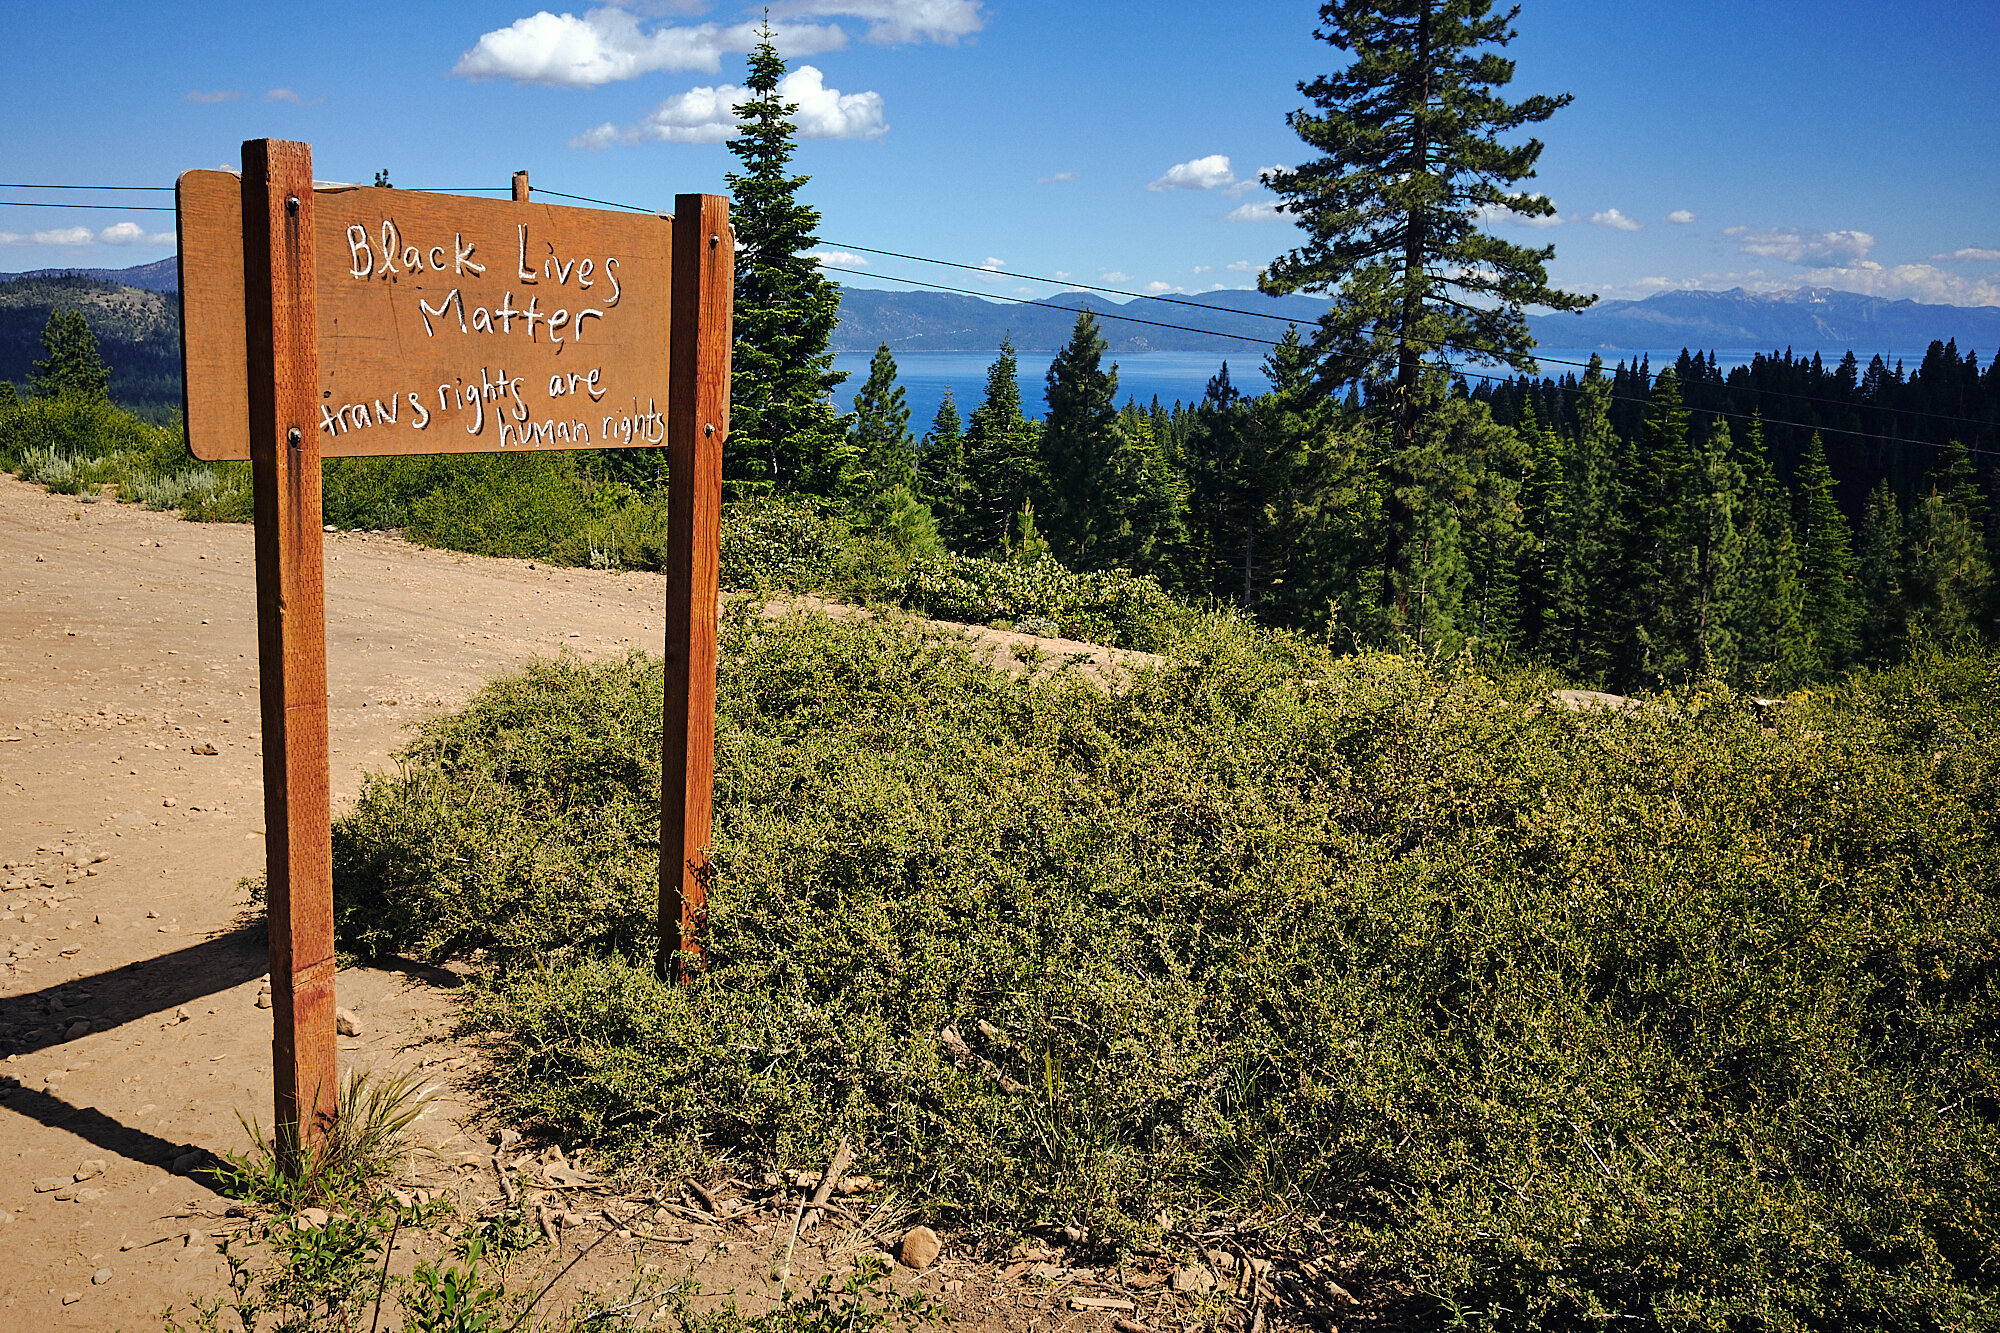  Normally I'm opposed to grafiti on public land, but this one rules ok. | 6/29/20 Tahoe Vista, CA 